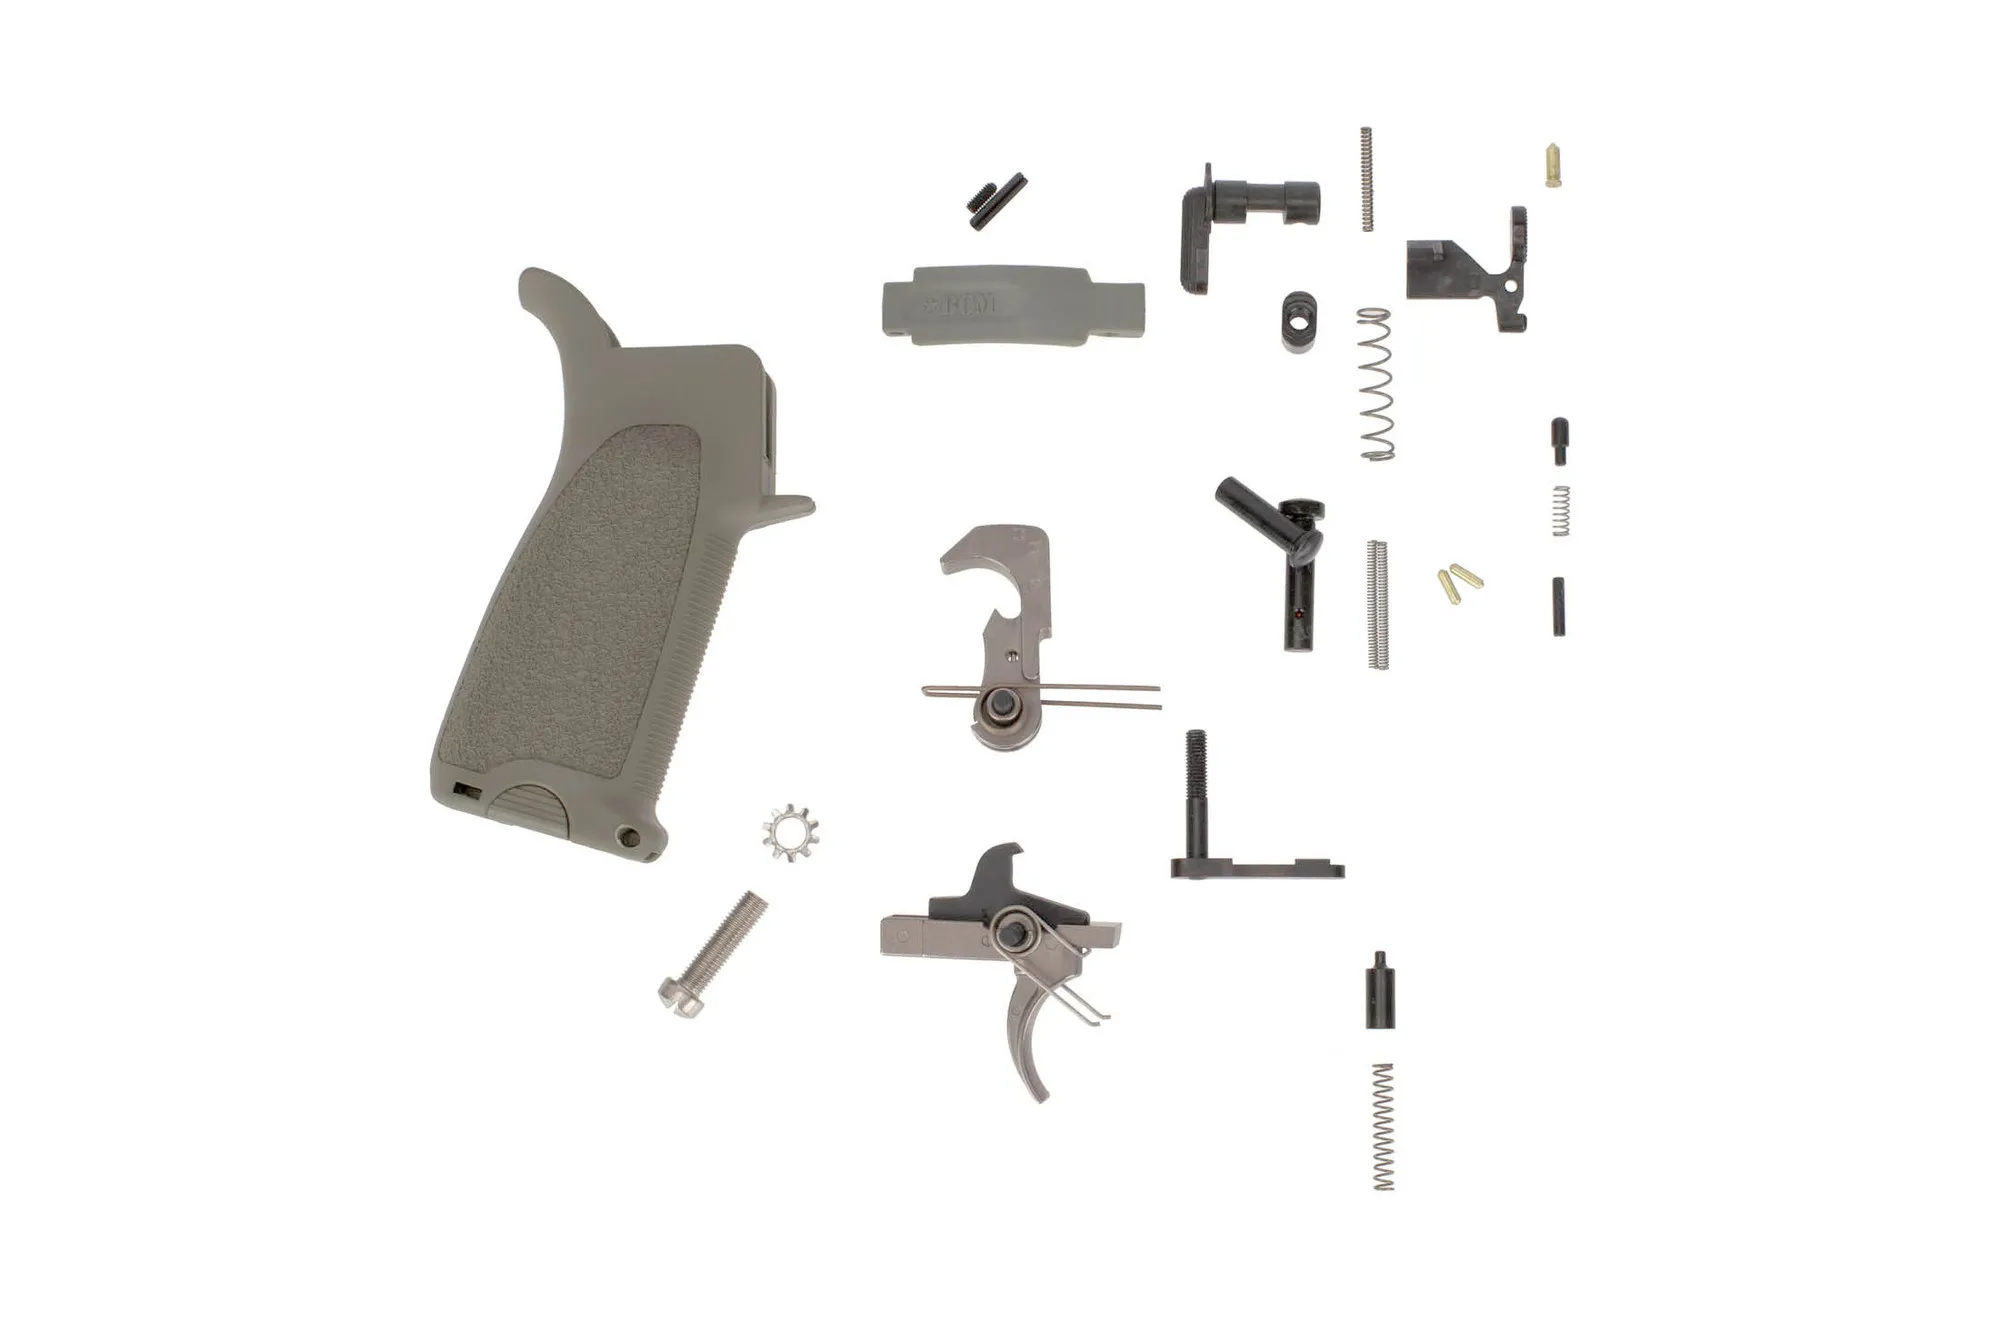 Bravo Company Manufacturing BCMGUNFIGHTER AR-15 Enhanced Lower Parts Kit - Foliage Green - $89.95 (add to cart to get this price)